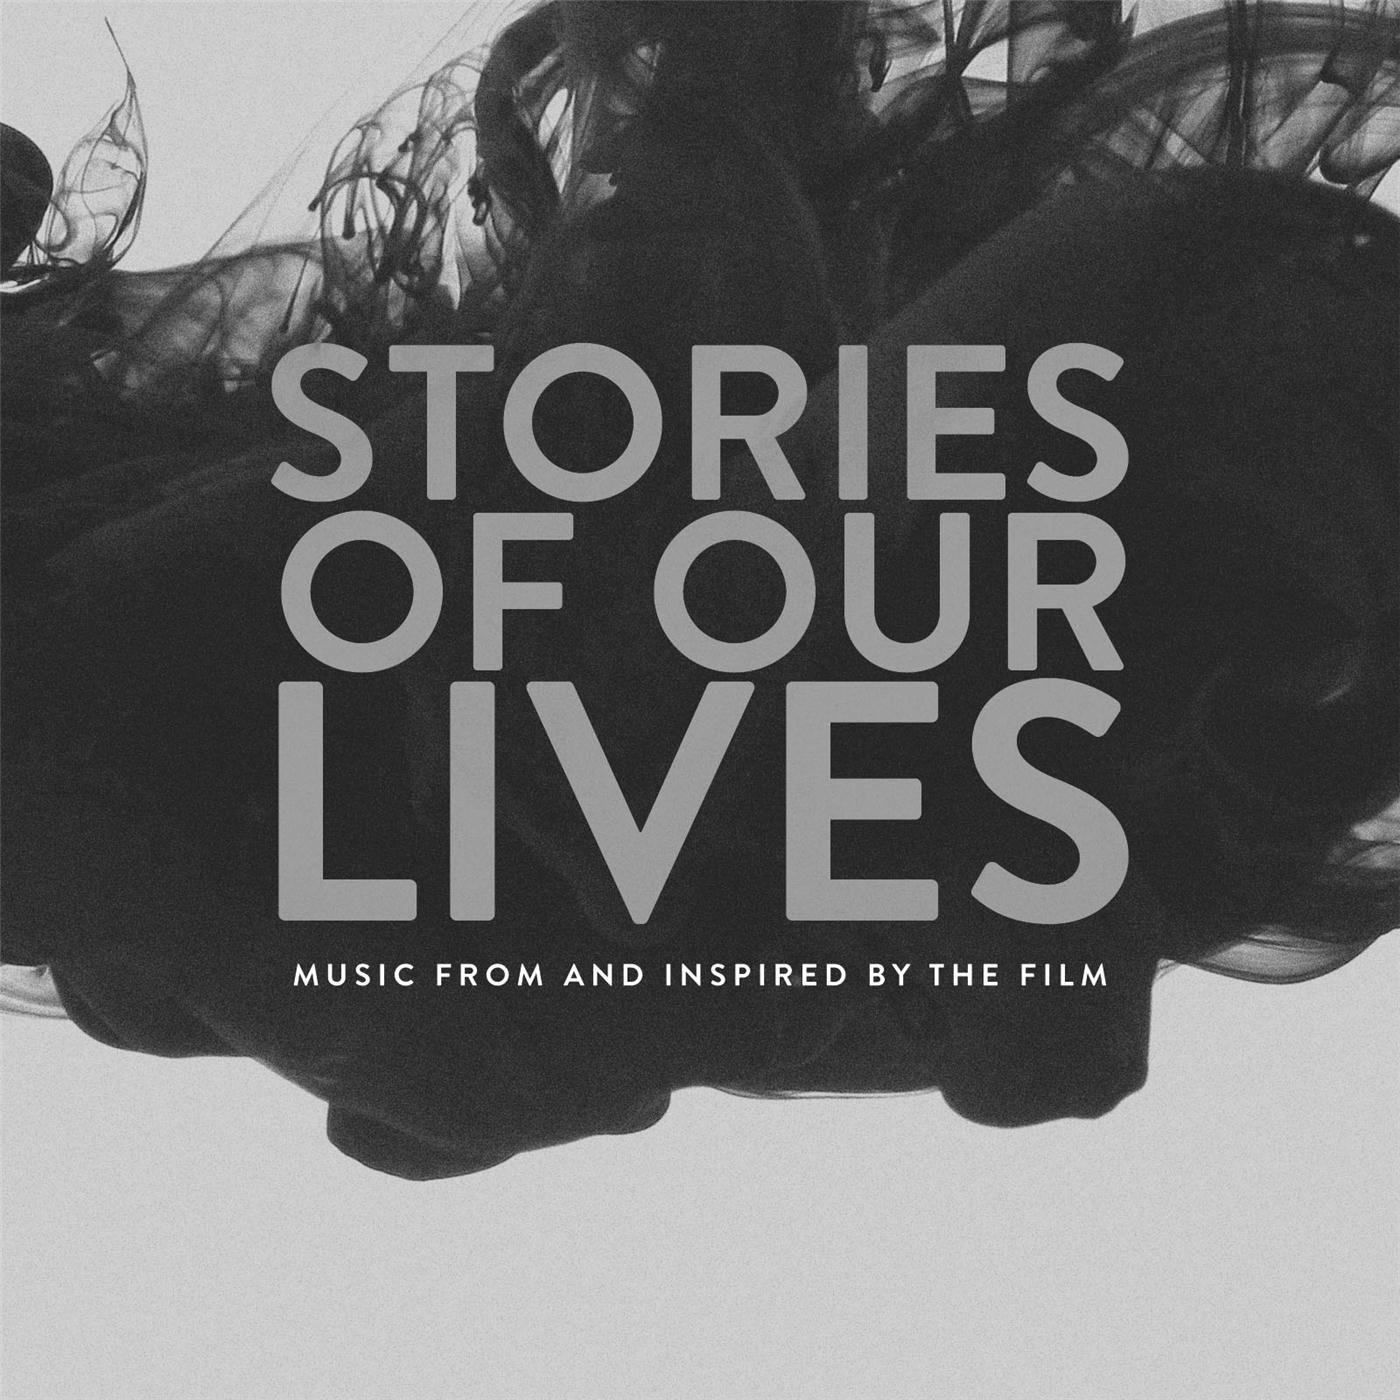 Музыка our story. Обложки для песни story of my Live. Music in our Life. Live your music